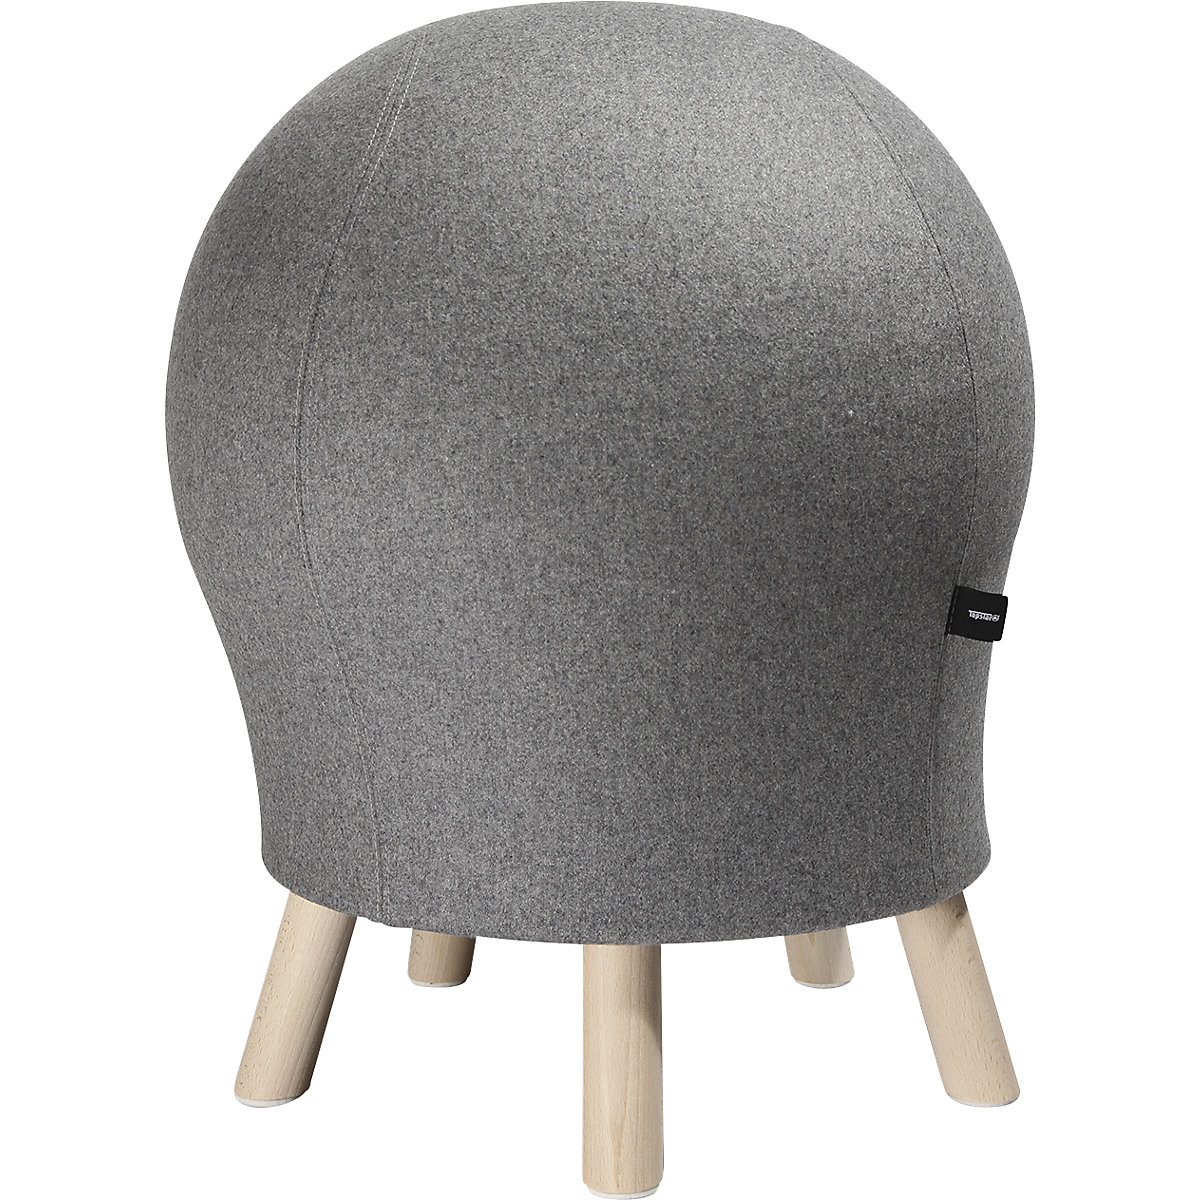 SITNESS 5 ALPINE fitness stool – Topstar, seat height approx. 620 mm, grey cover-5